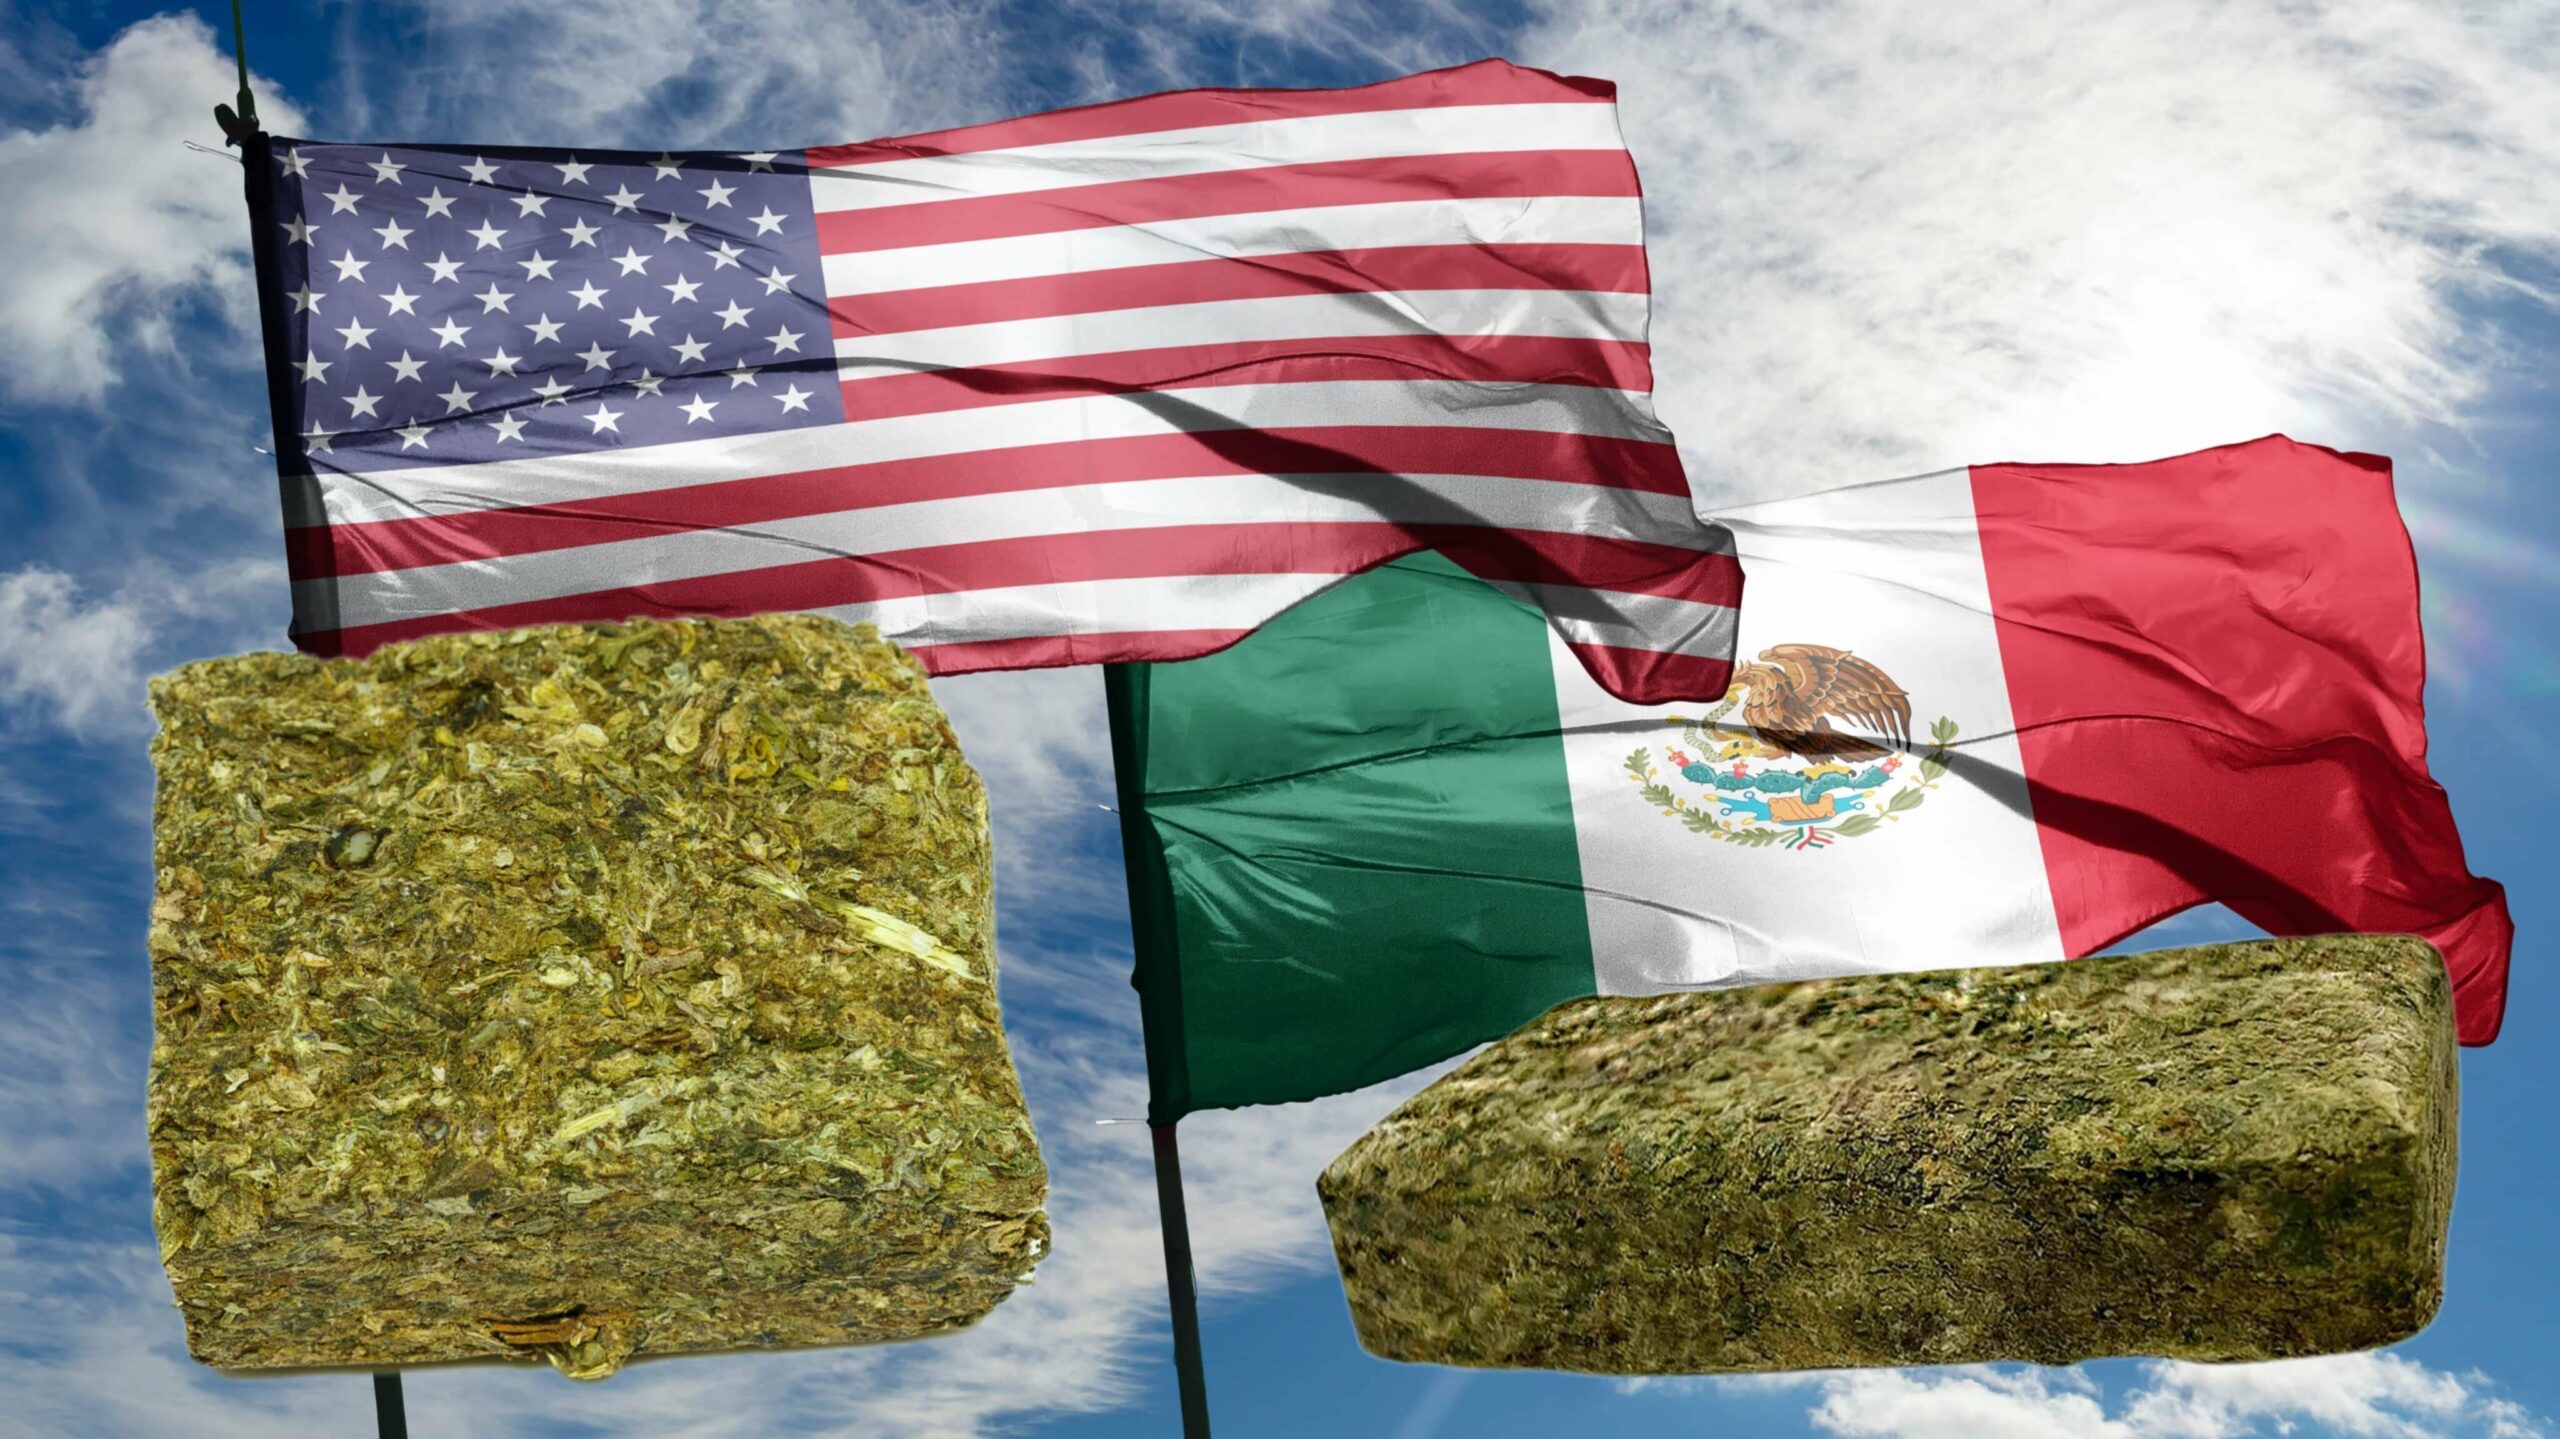 Mexican-Grown Pot Hits Record Low at Border as Competition with State-Legal Pot Rises